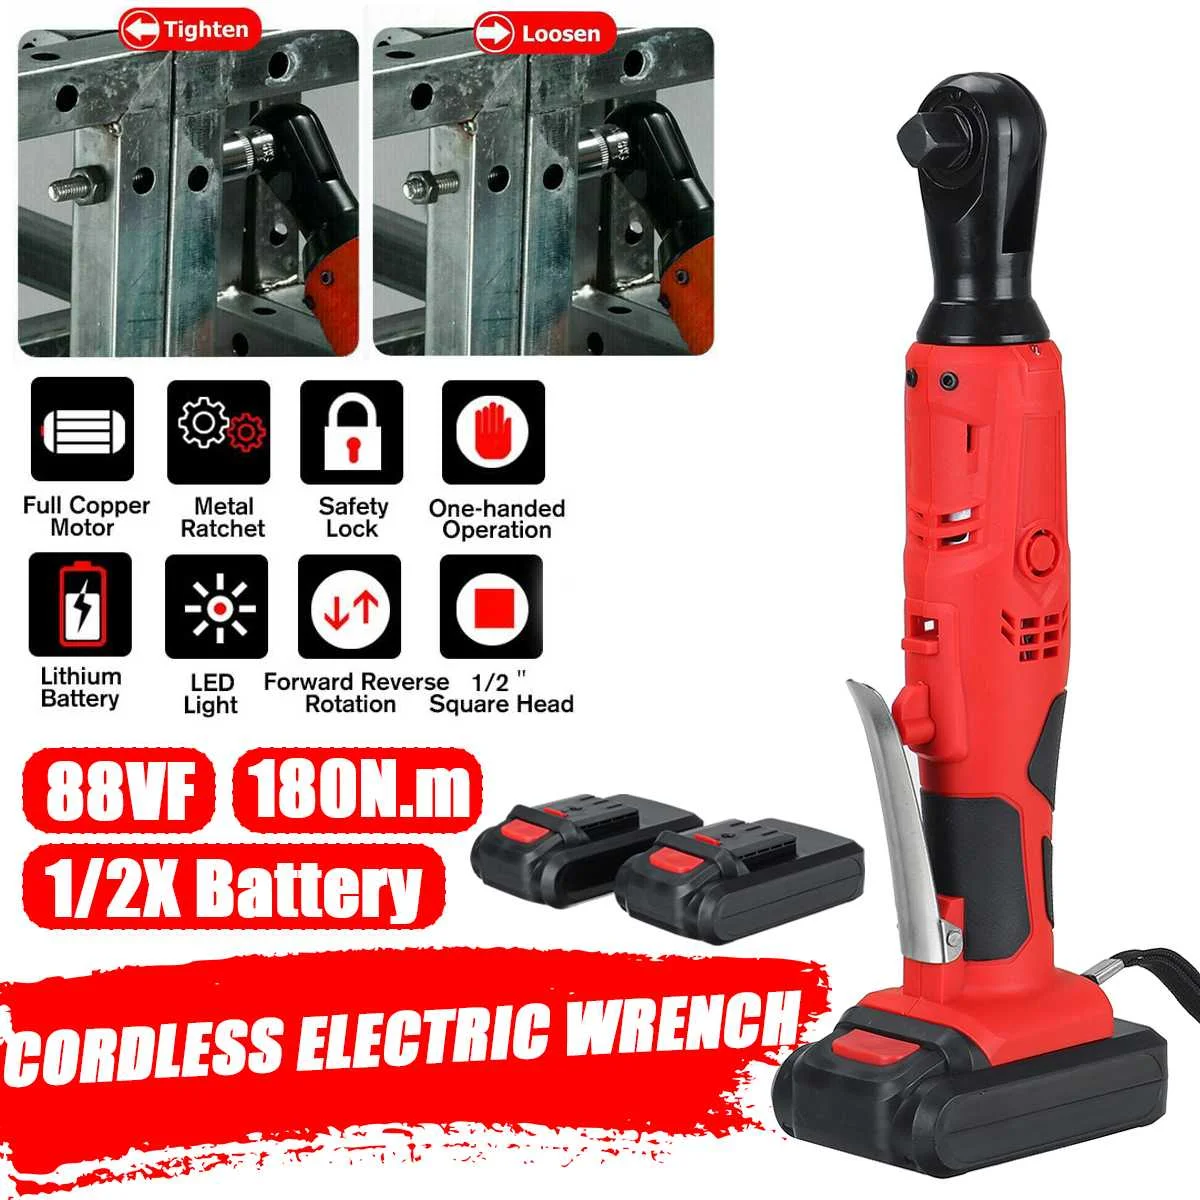 

Wolike Electric Wrench 1/2" Cordless Ratchet 42V Rechargeable Scaffolding 180N.m Right Angle Wrench Tool 2 Battery Charger Kit